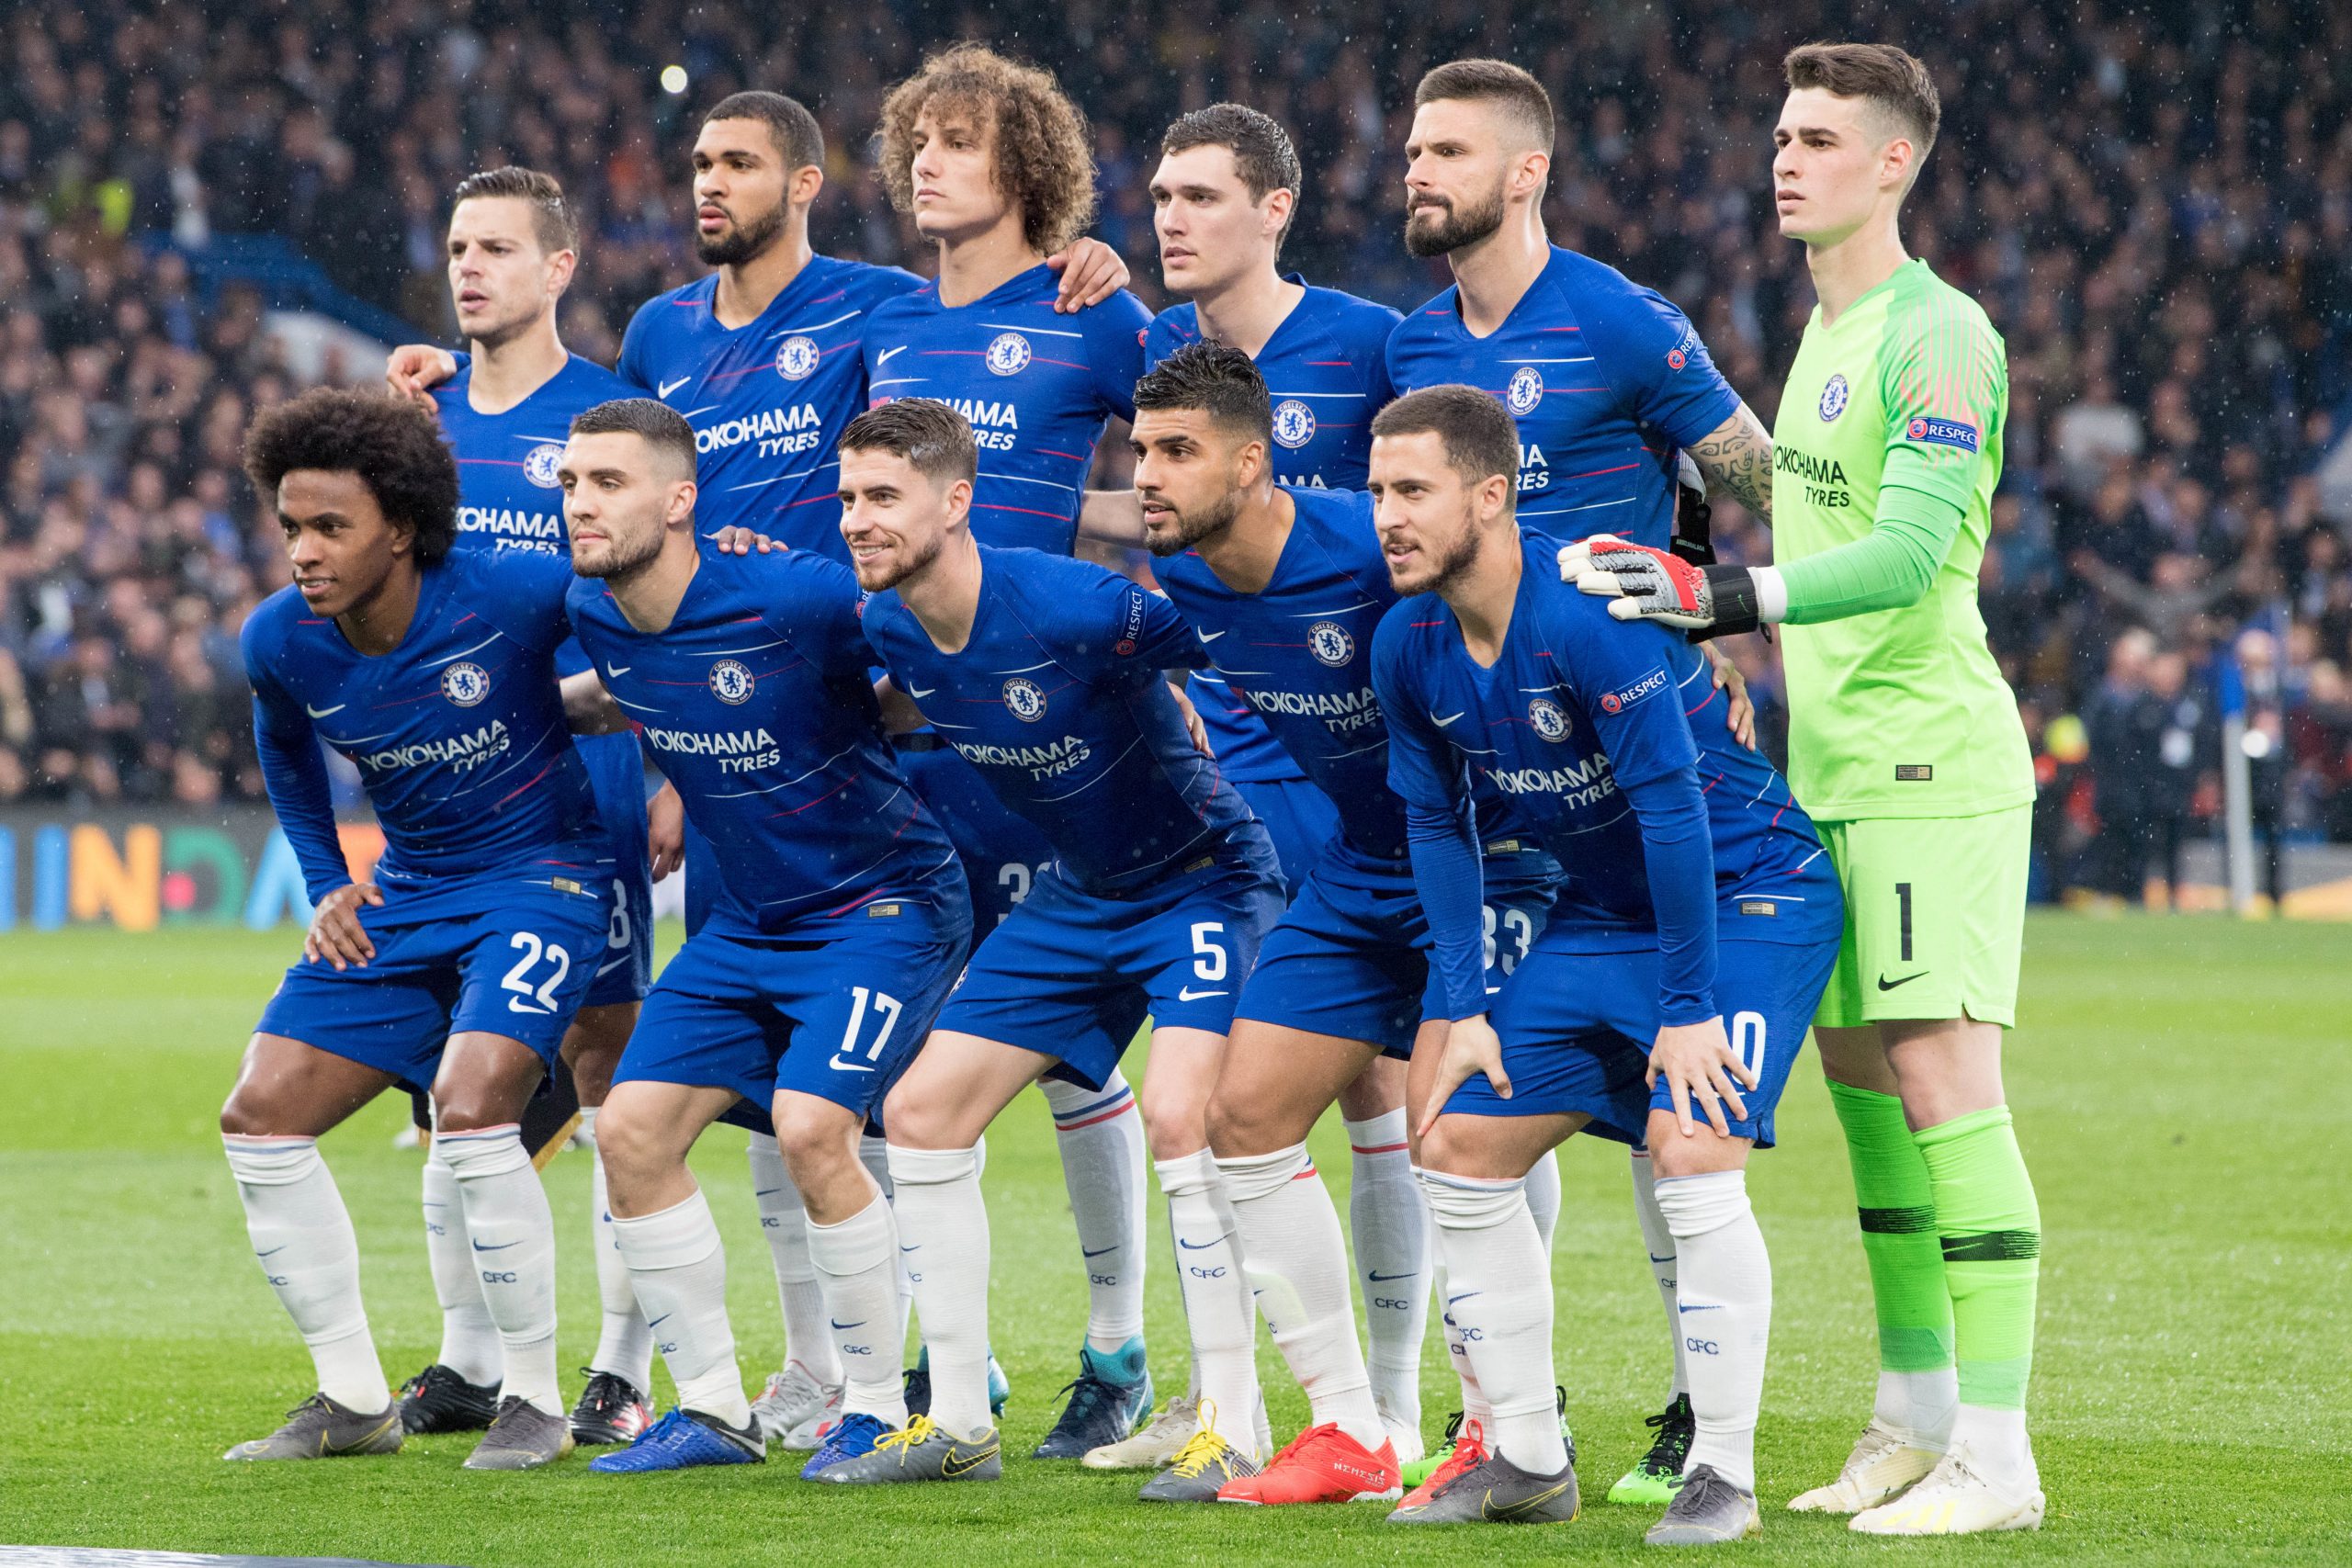 Chelsea Season Review: Moving to Stand Still